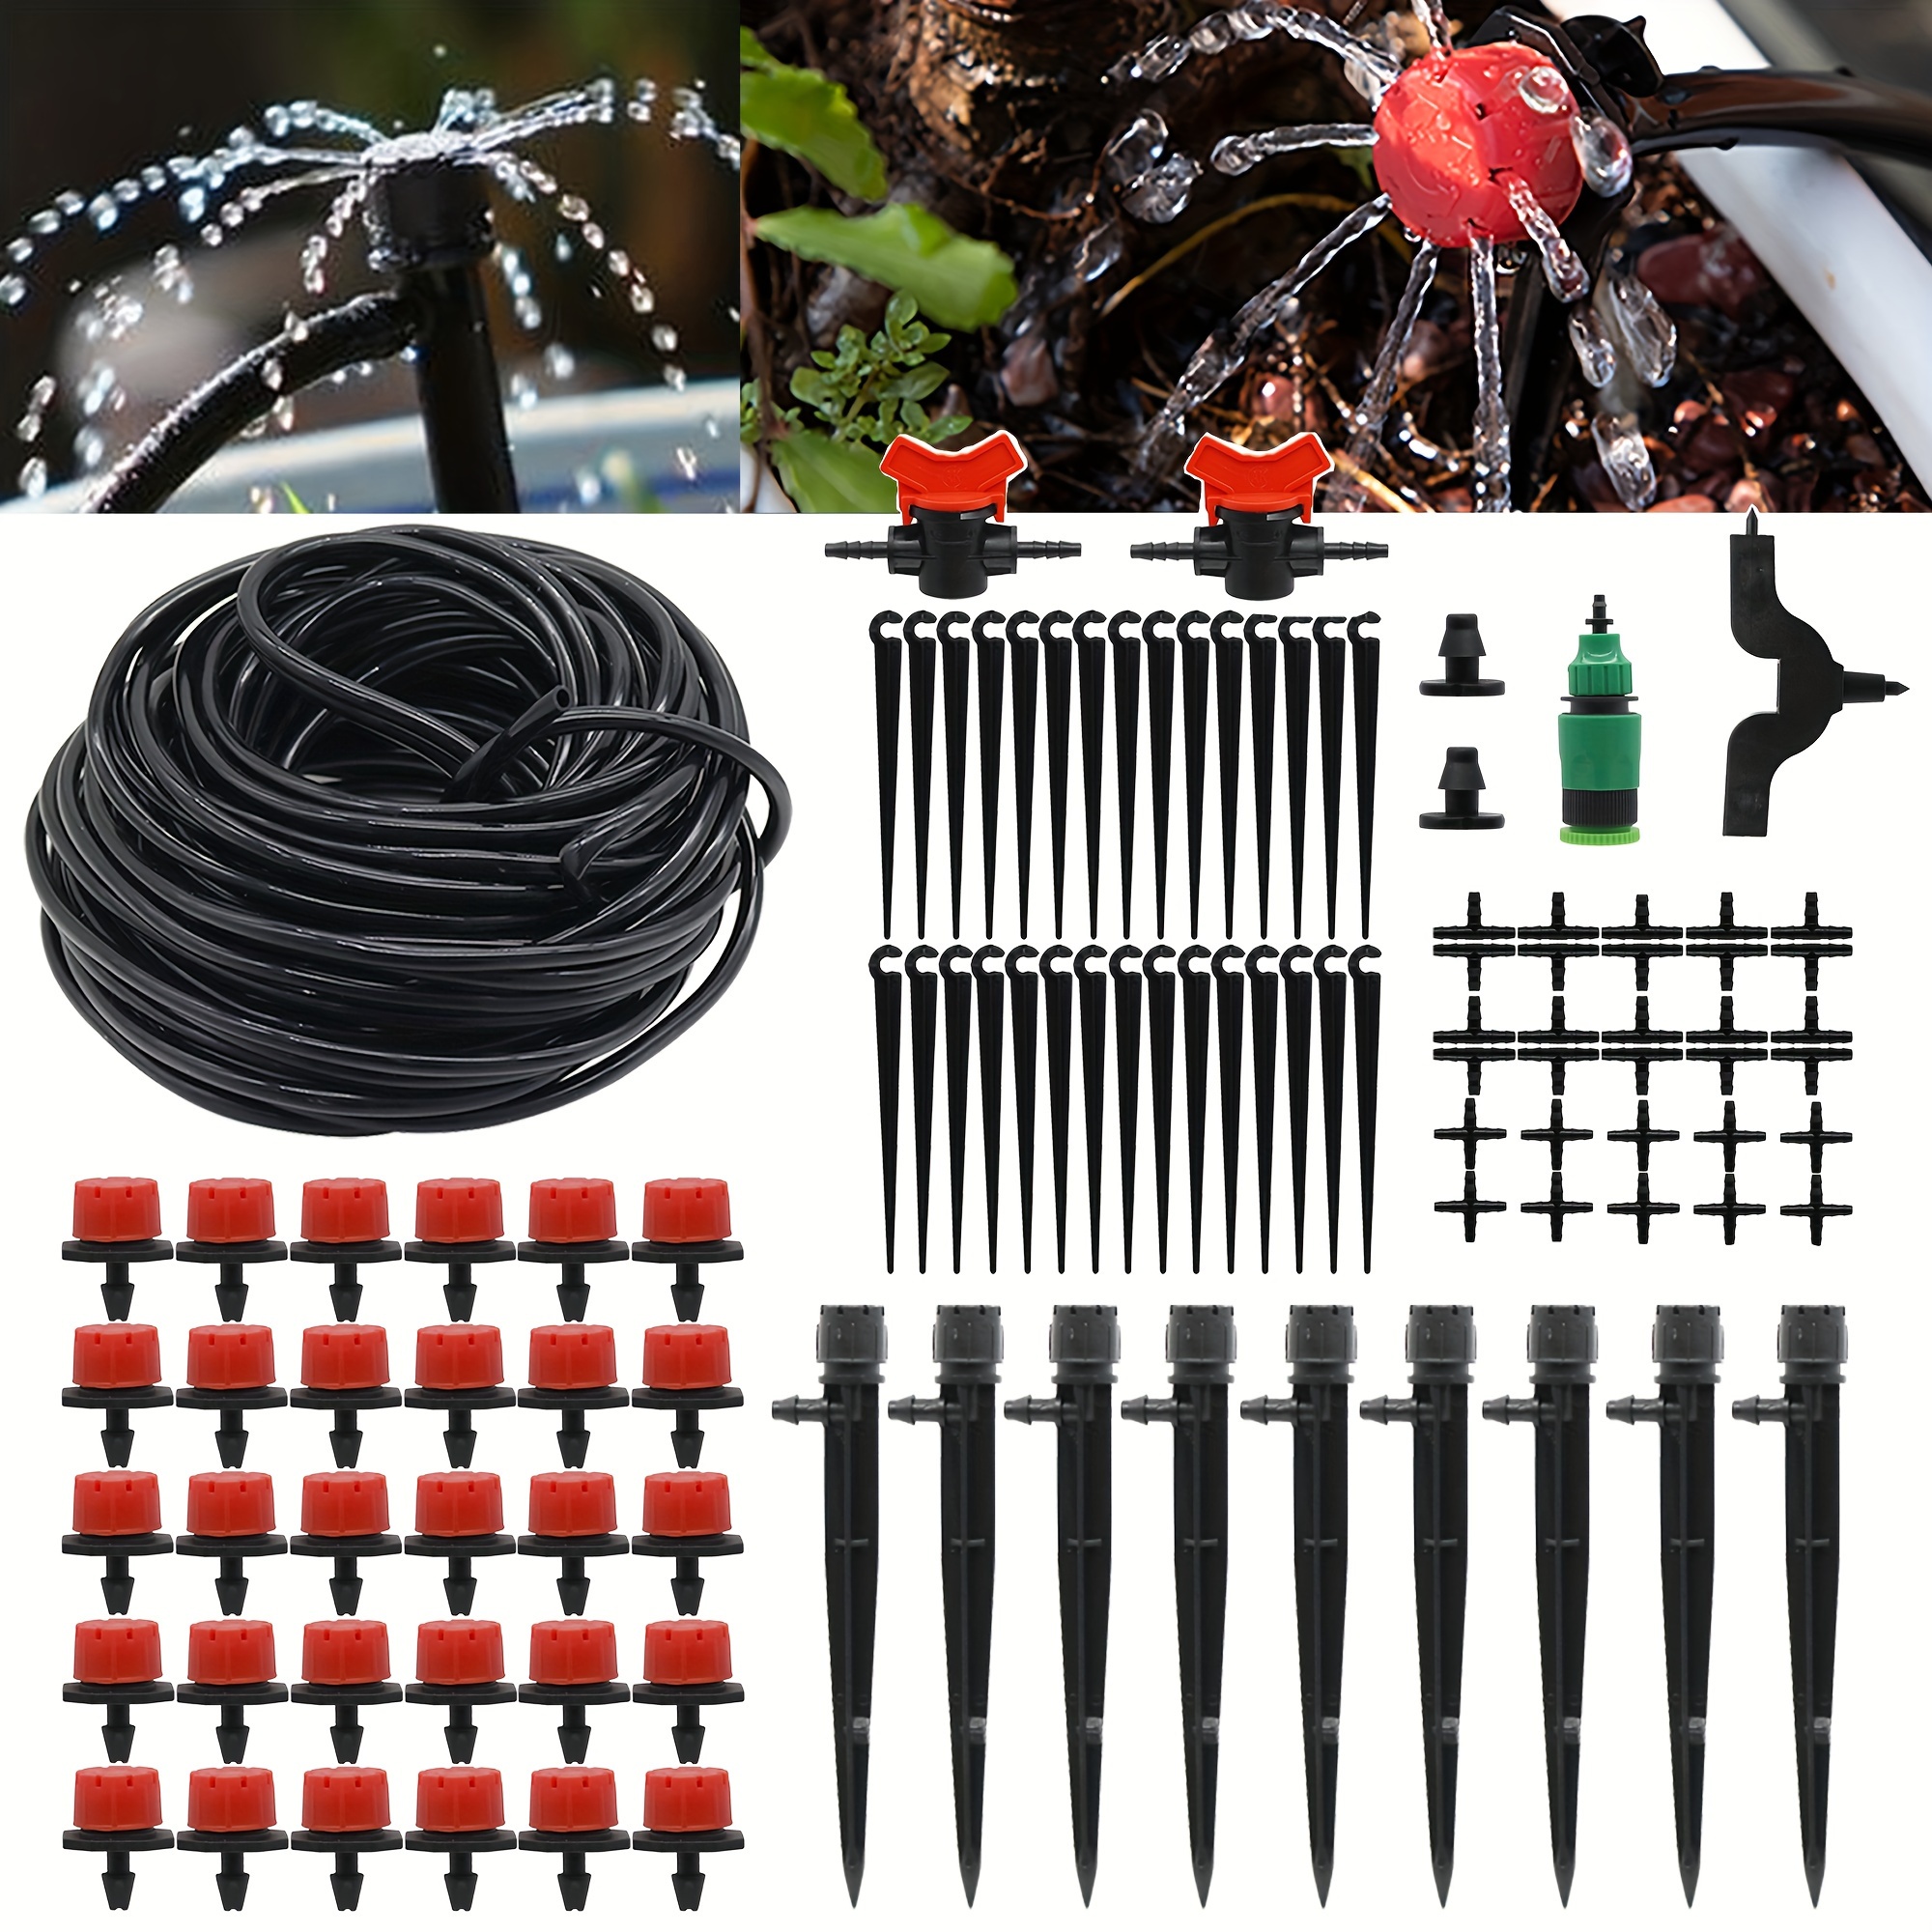 

1set 20m (65.617ft) Drip Irrigation Watering Kit, Automatic Watering System For Plants And Flowers With Adjustable Dripper, Garden Greenhouse Balcony Courtyard Bonsai Supplies